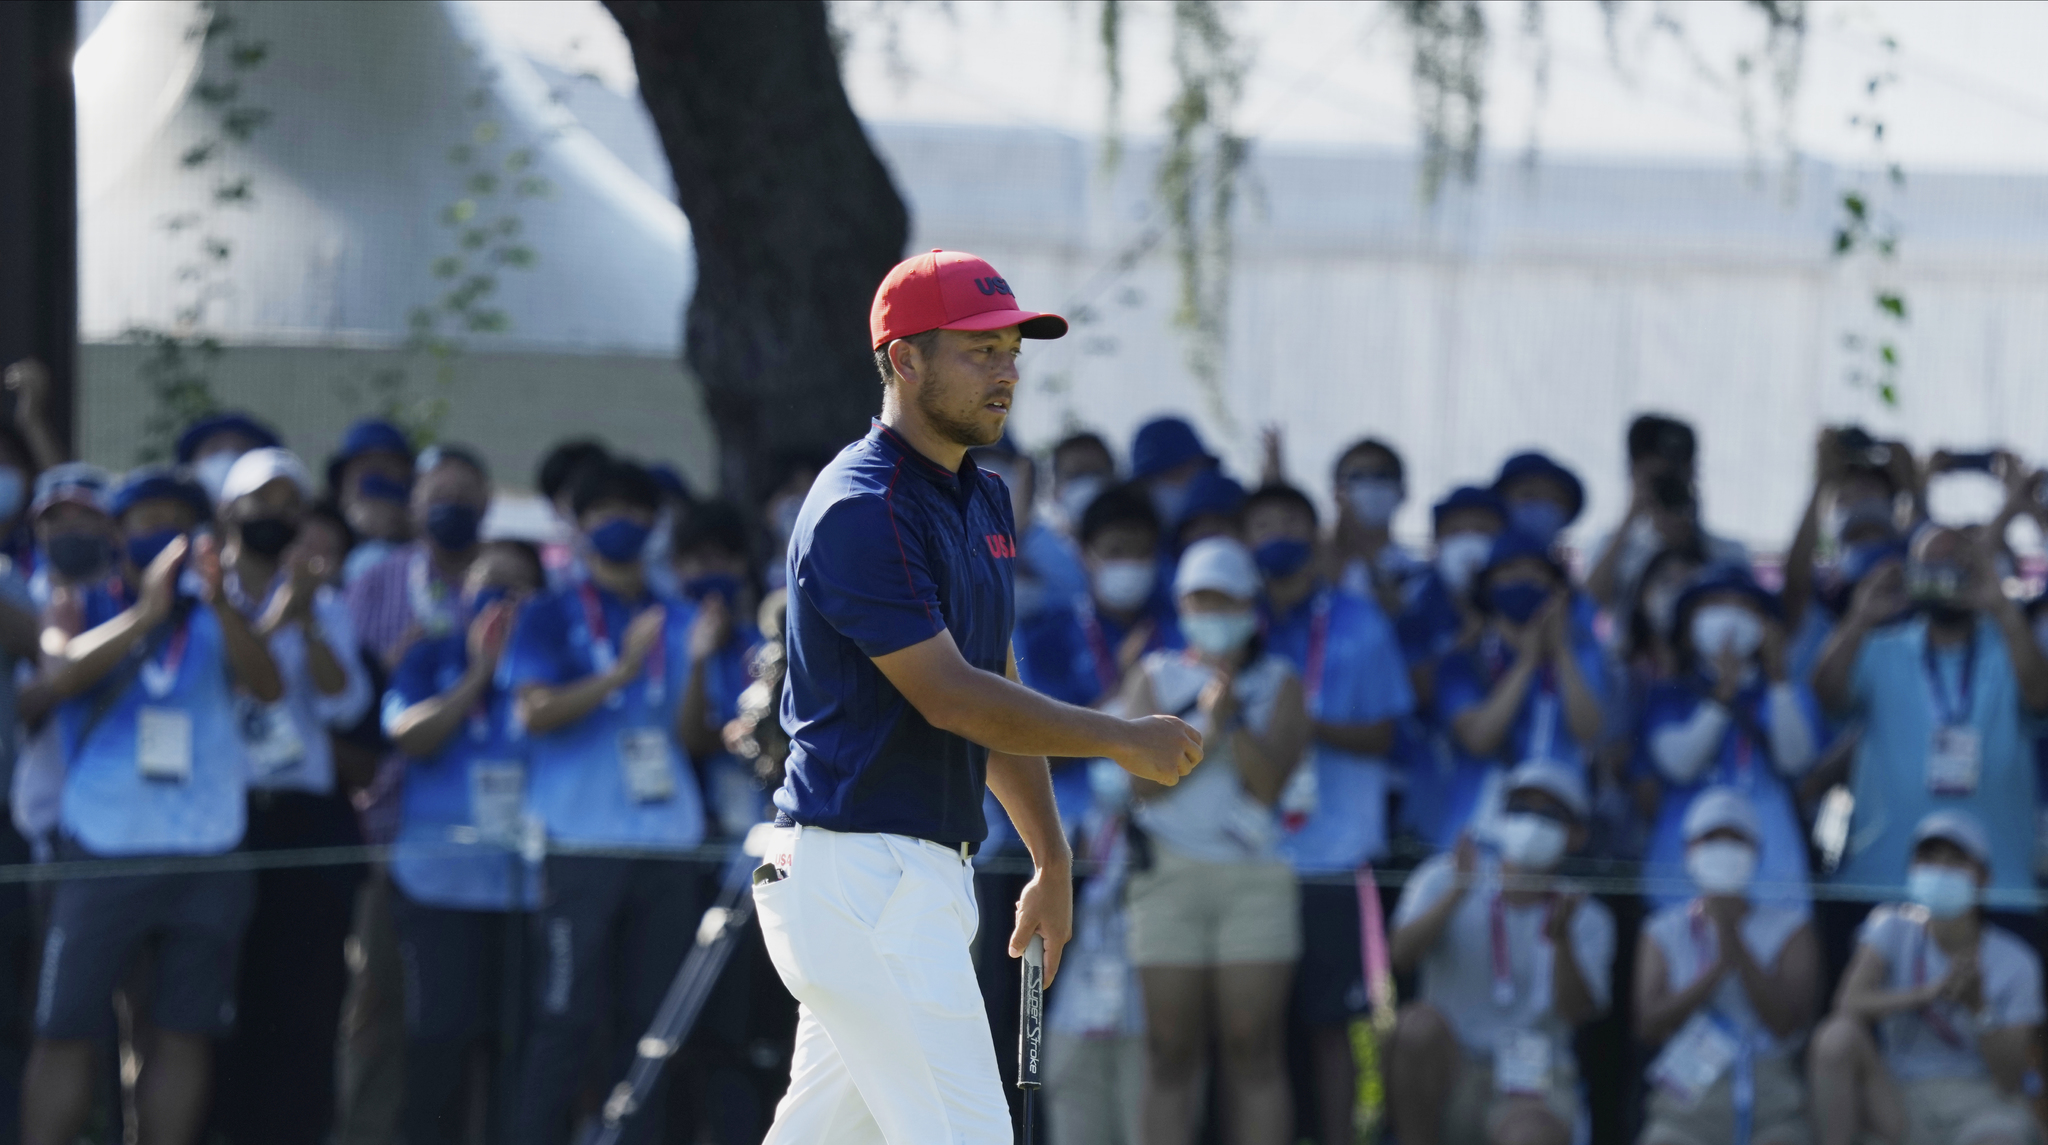 USA's Xander Schauffele reacts after winning the gold medal in the men's golf event.